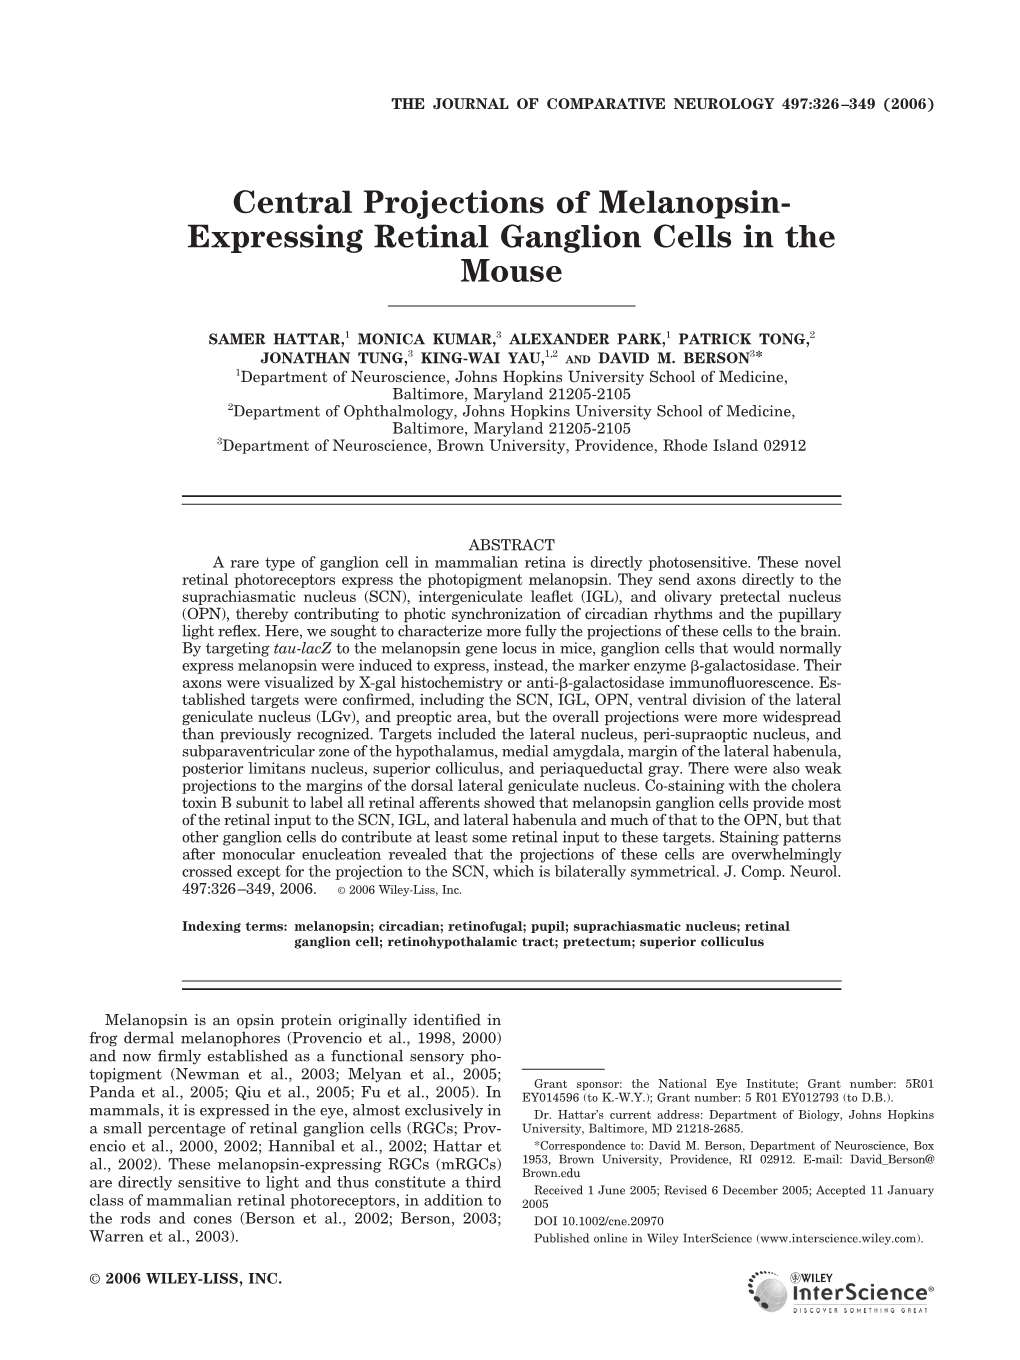 Central Projections of Melanopsin-Expressing Retinal